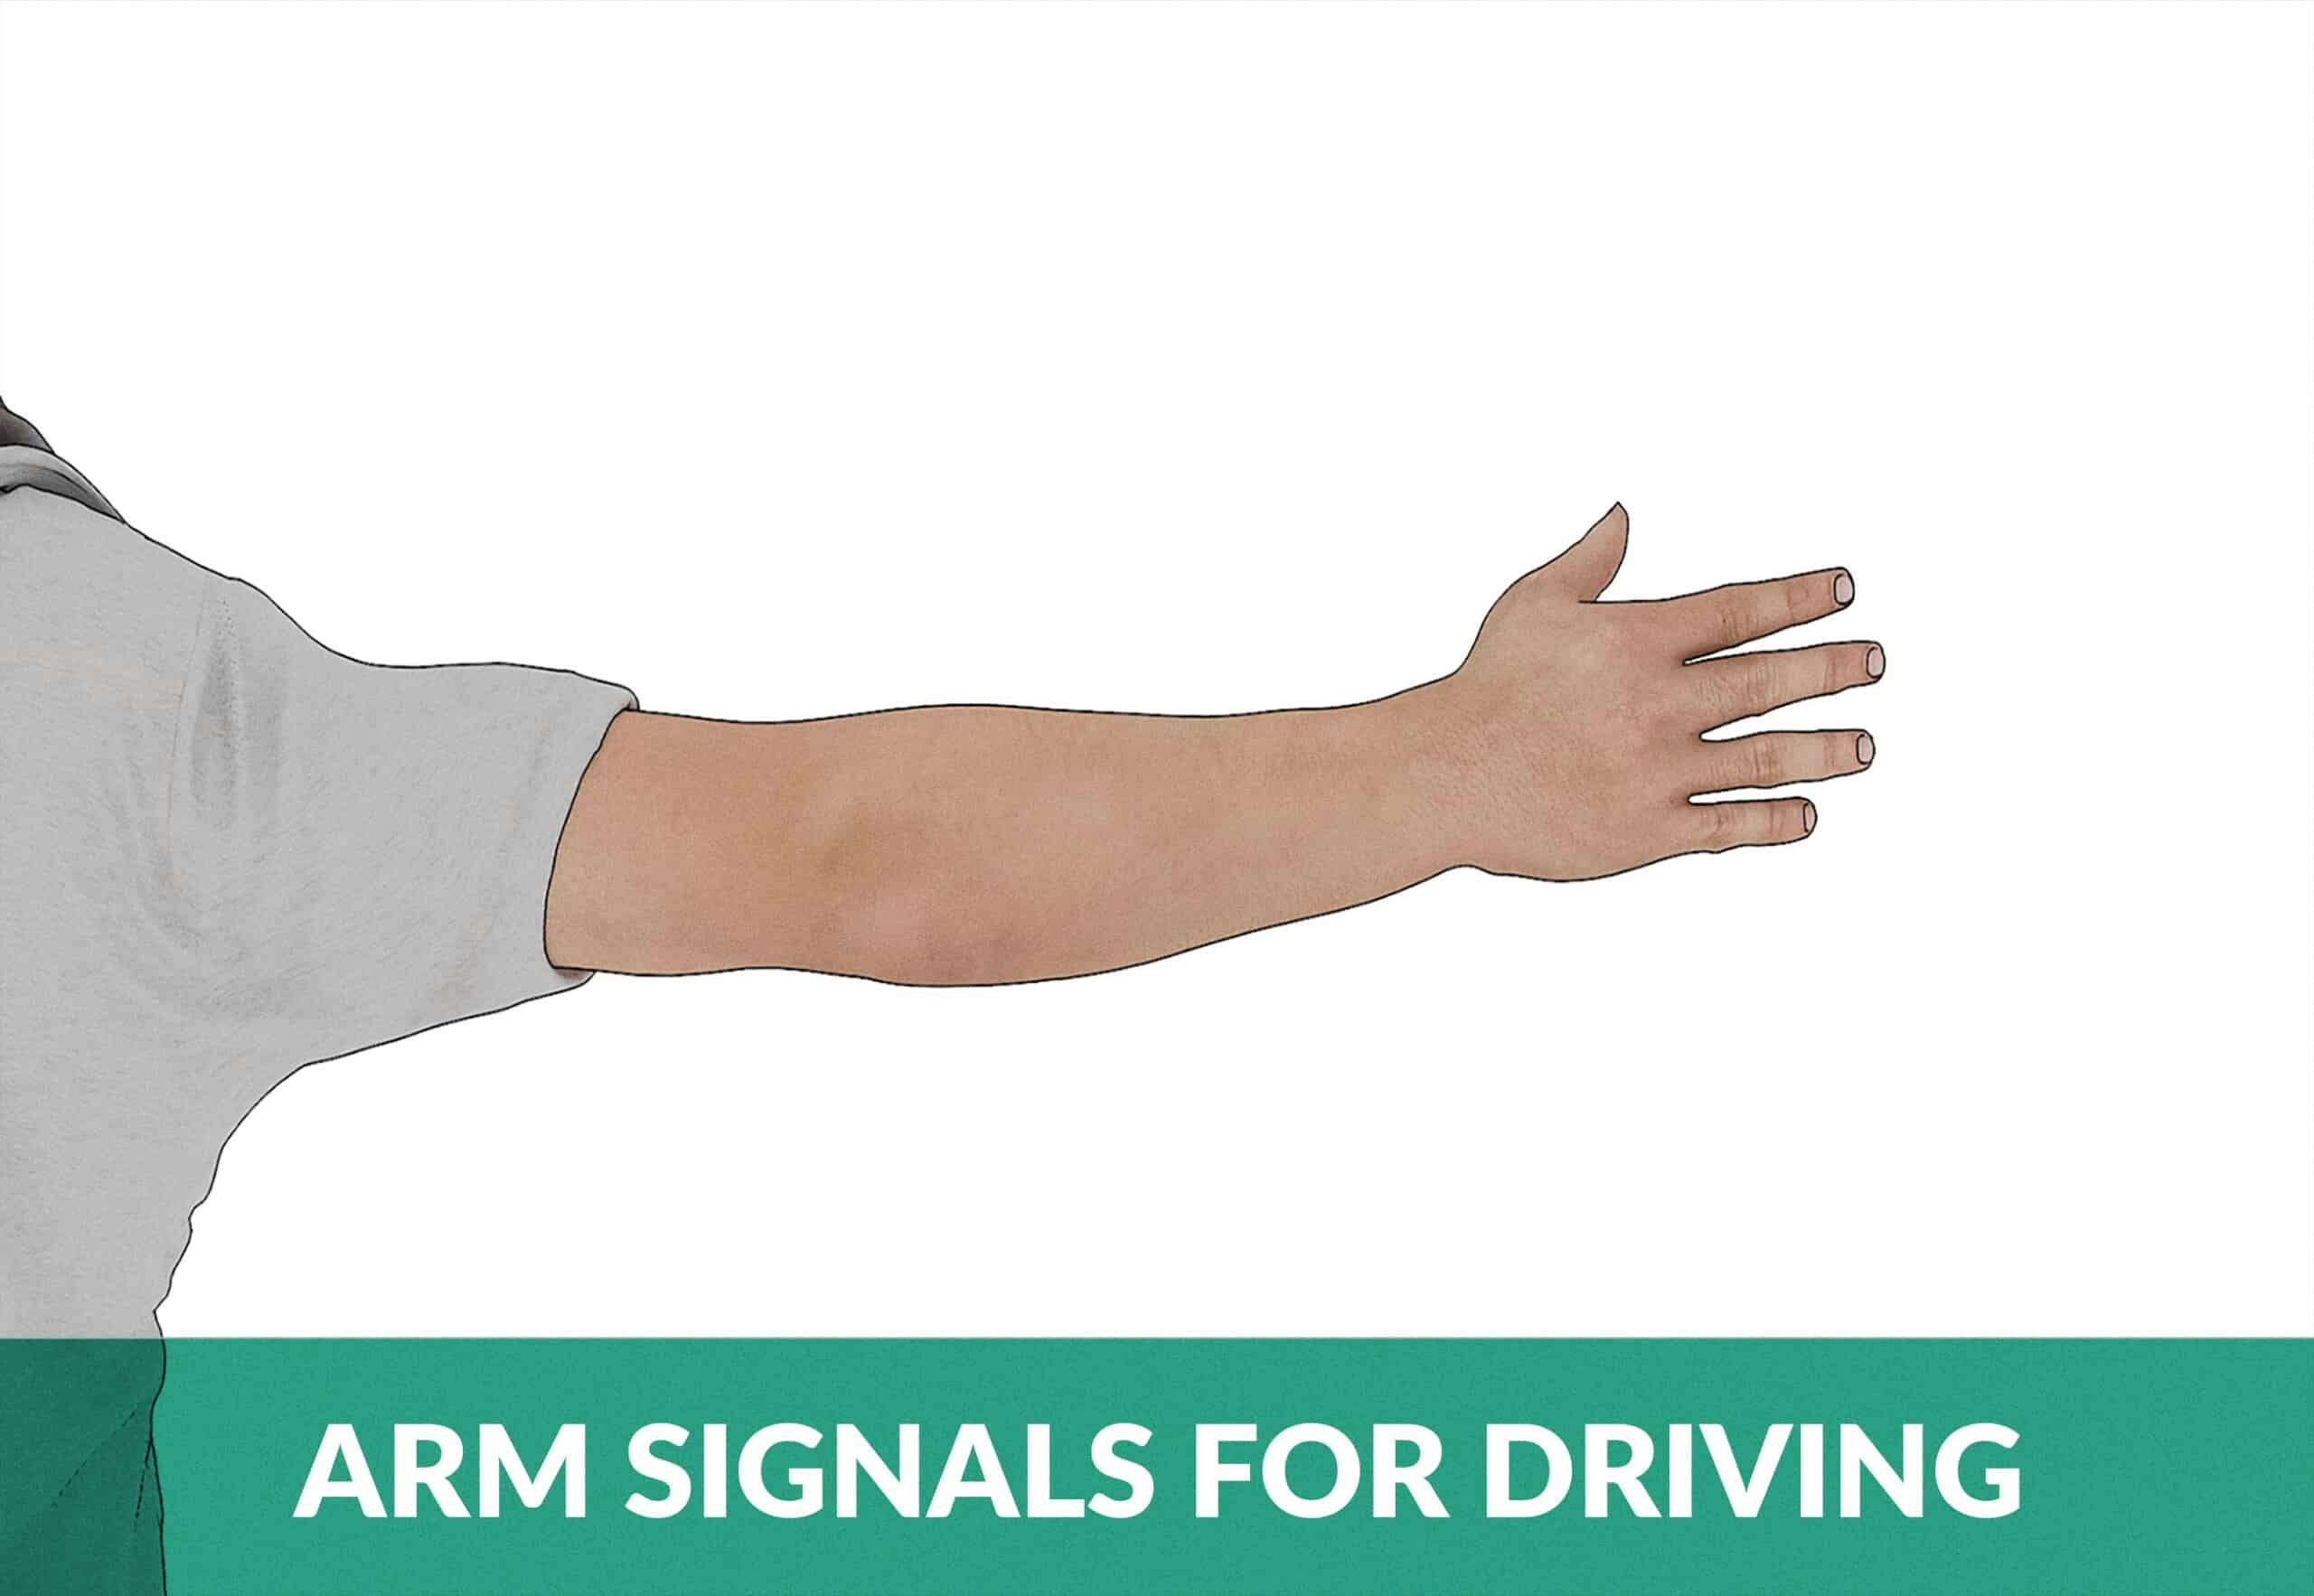 Hand Turn Signals in a Car: How to hold your left arm when turning